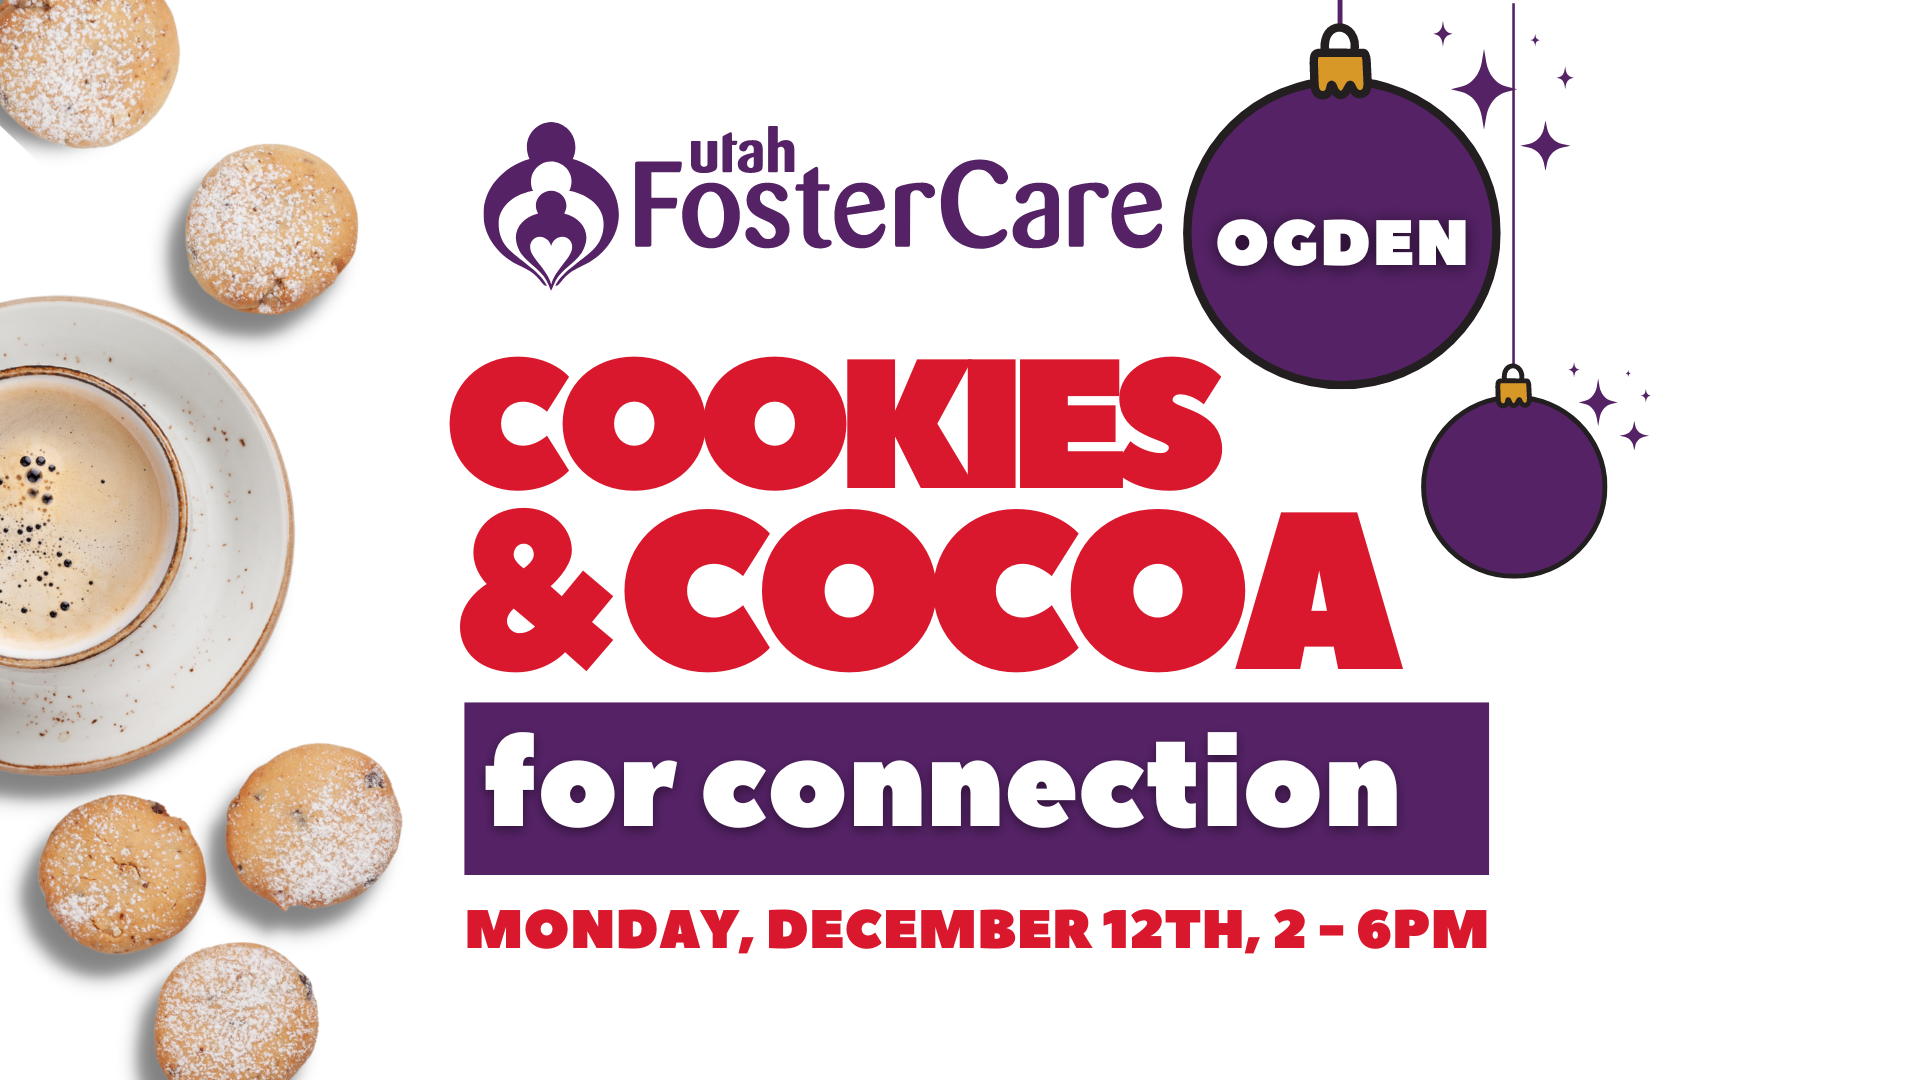 Cookies and Cocoa for Connection - Ogden